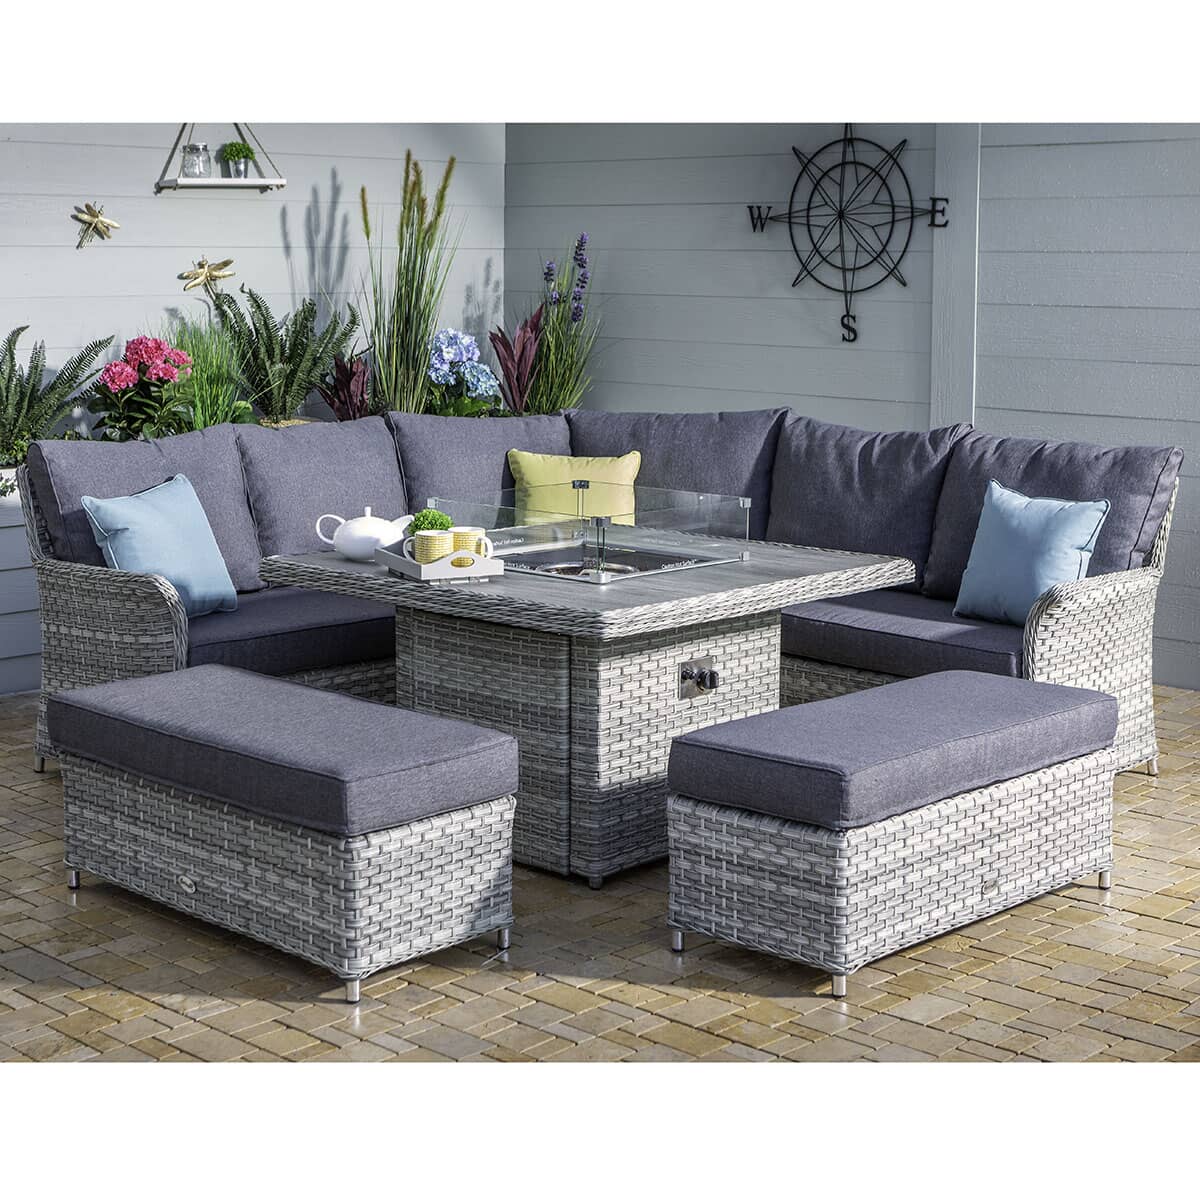 Hartman Heritage Tuscan Grand Square Casual Dining Corner Set with Gas Fire Pit Ash/Slate